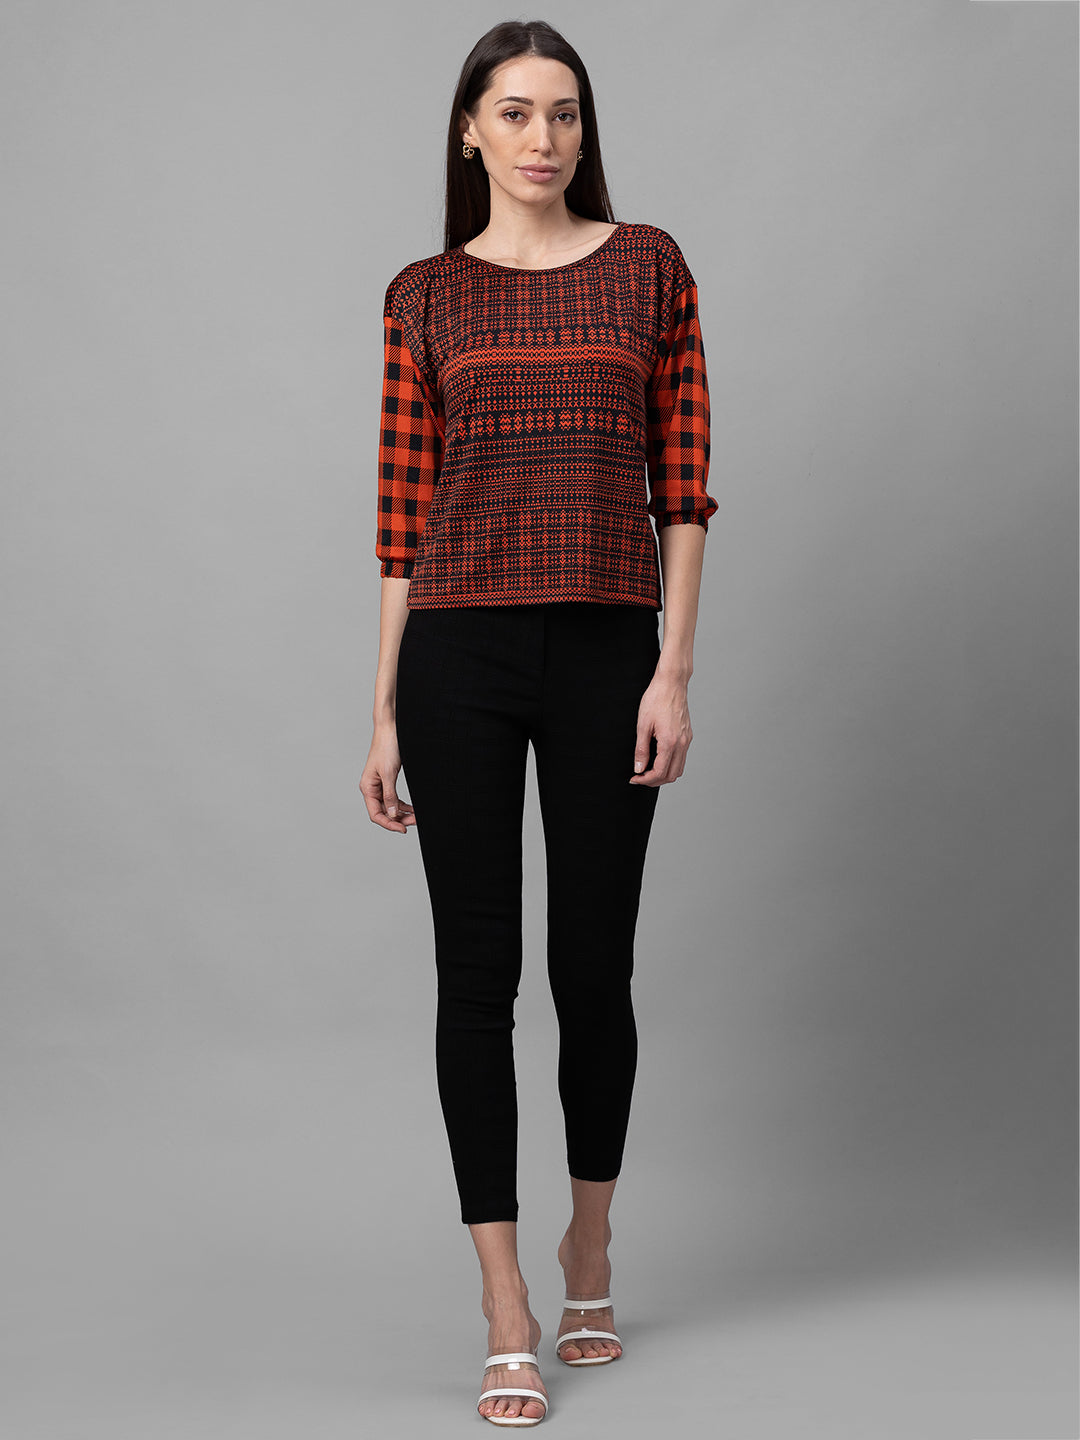 Globus Black Checked Skinny Fit Cropped Peg Trousers